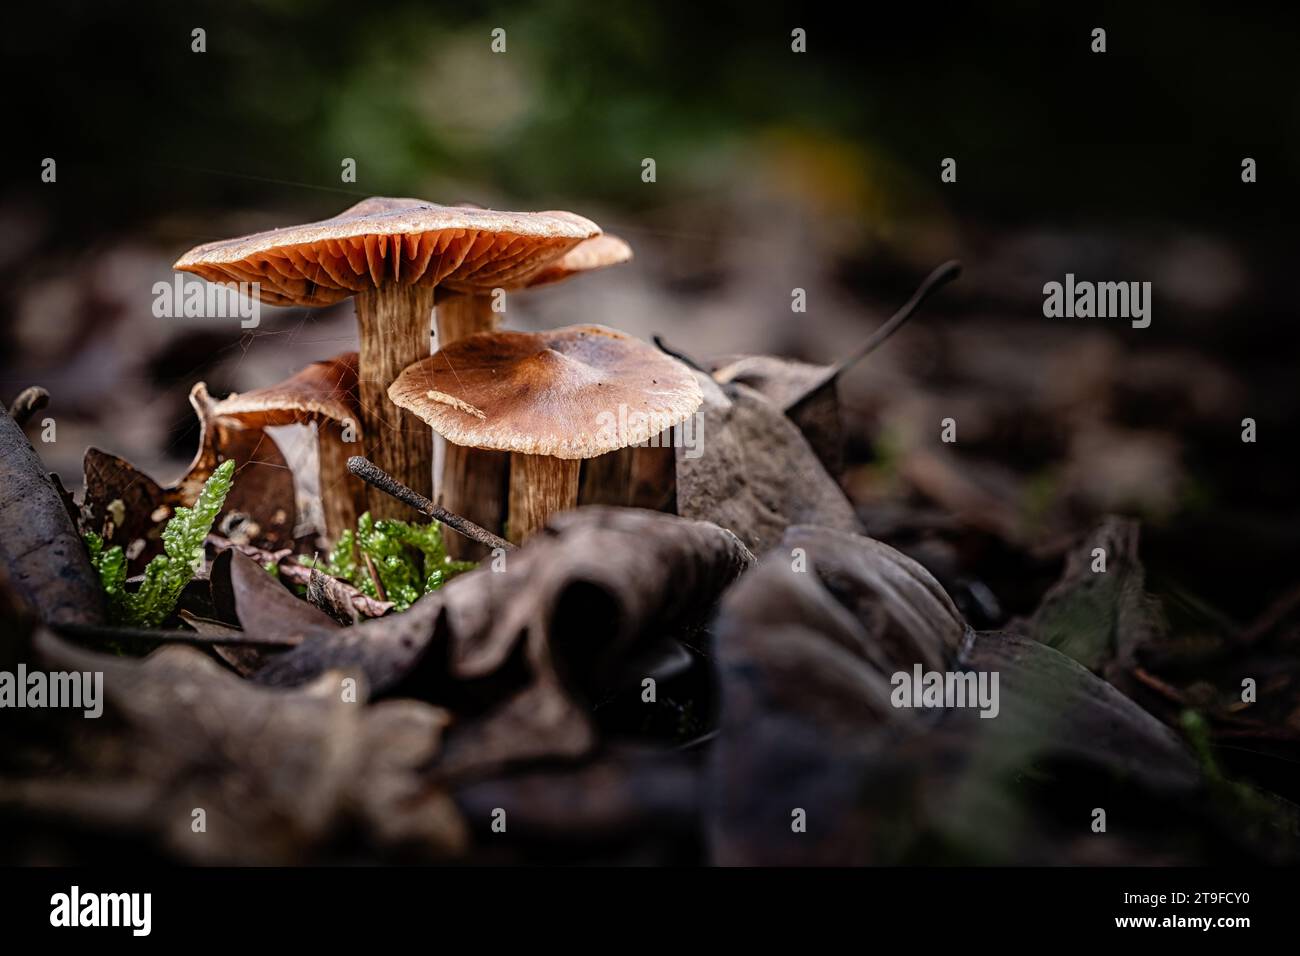 Earthy webcap mushroom, a species of Cortinar, growing through the leaf mould of a forest floor in the Dordogne region of France Stock Photo